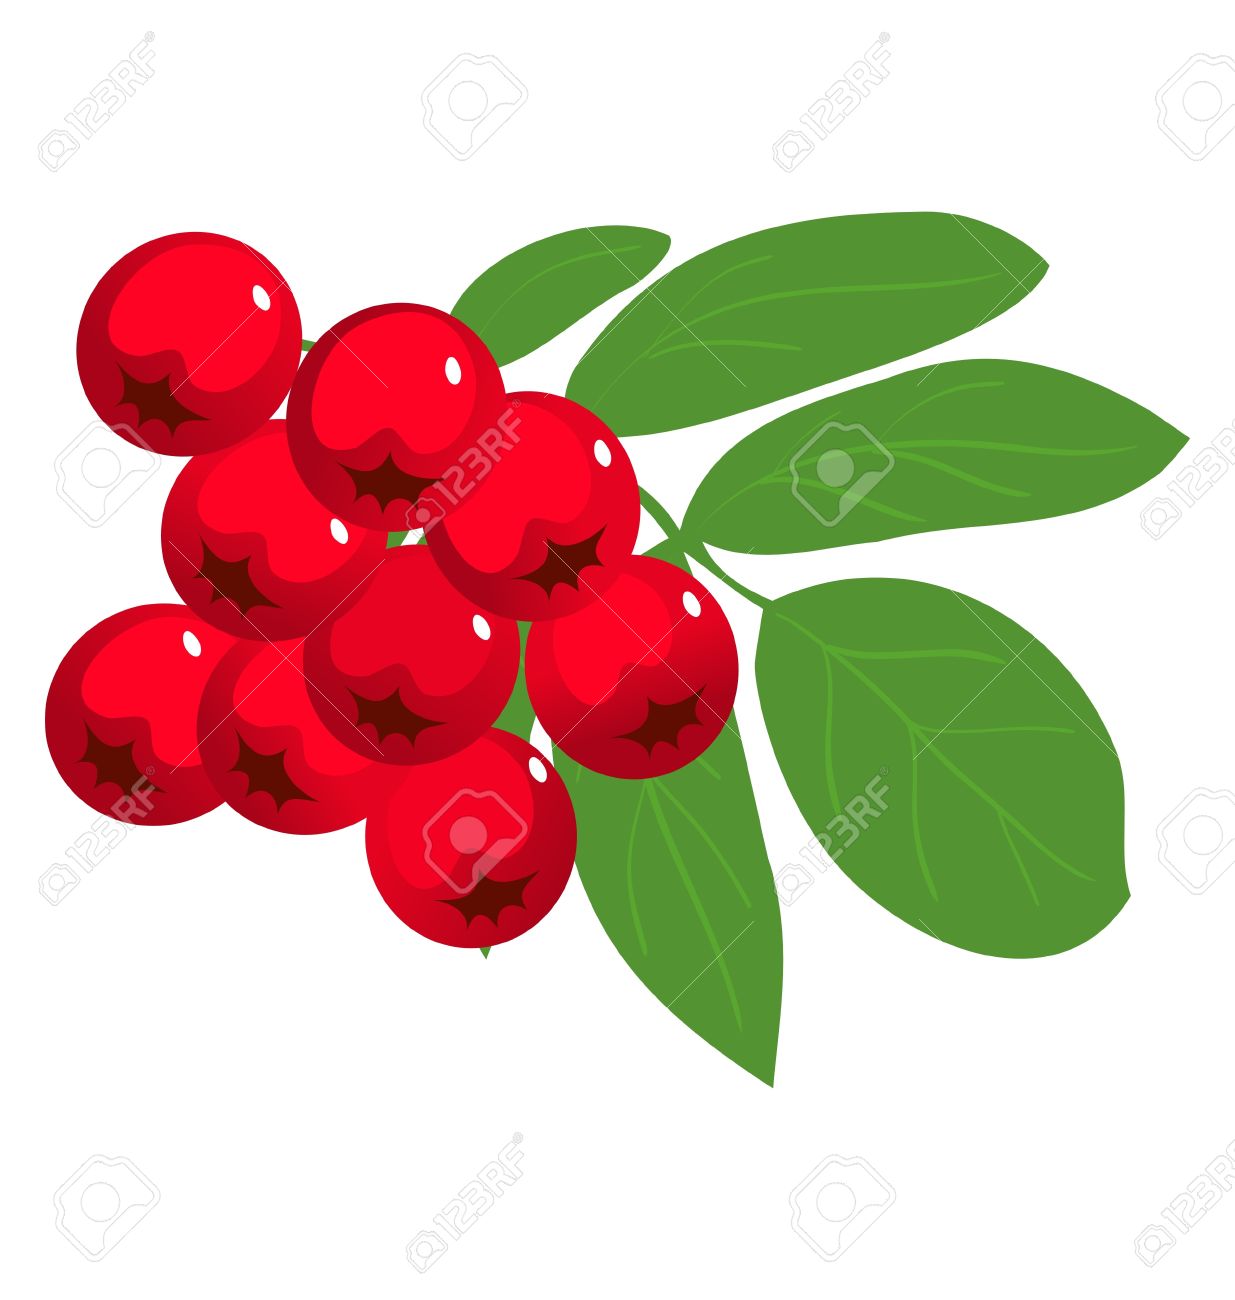 Mountain Ash Or Rowan Berry The White Royalty Free Cliparts.